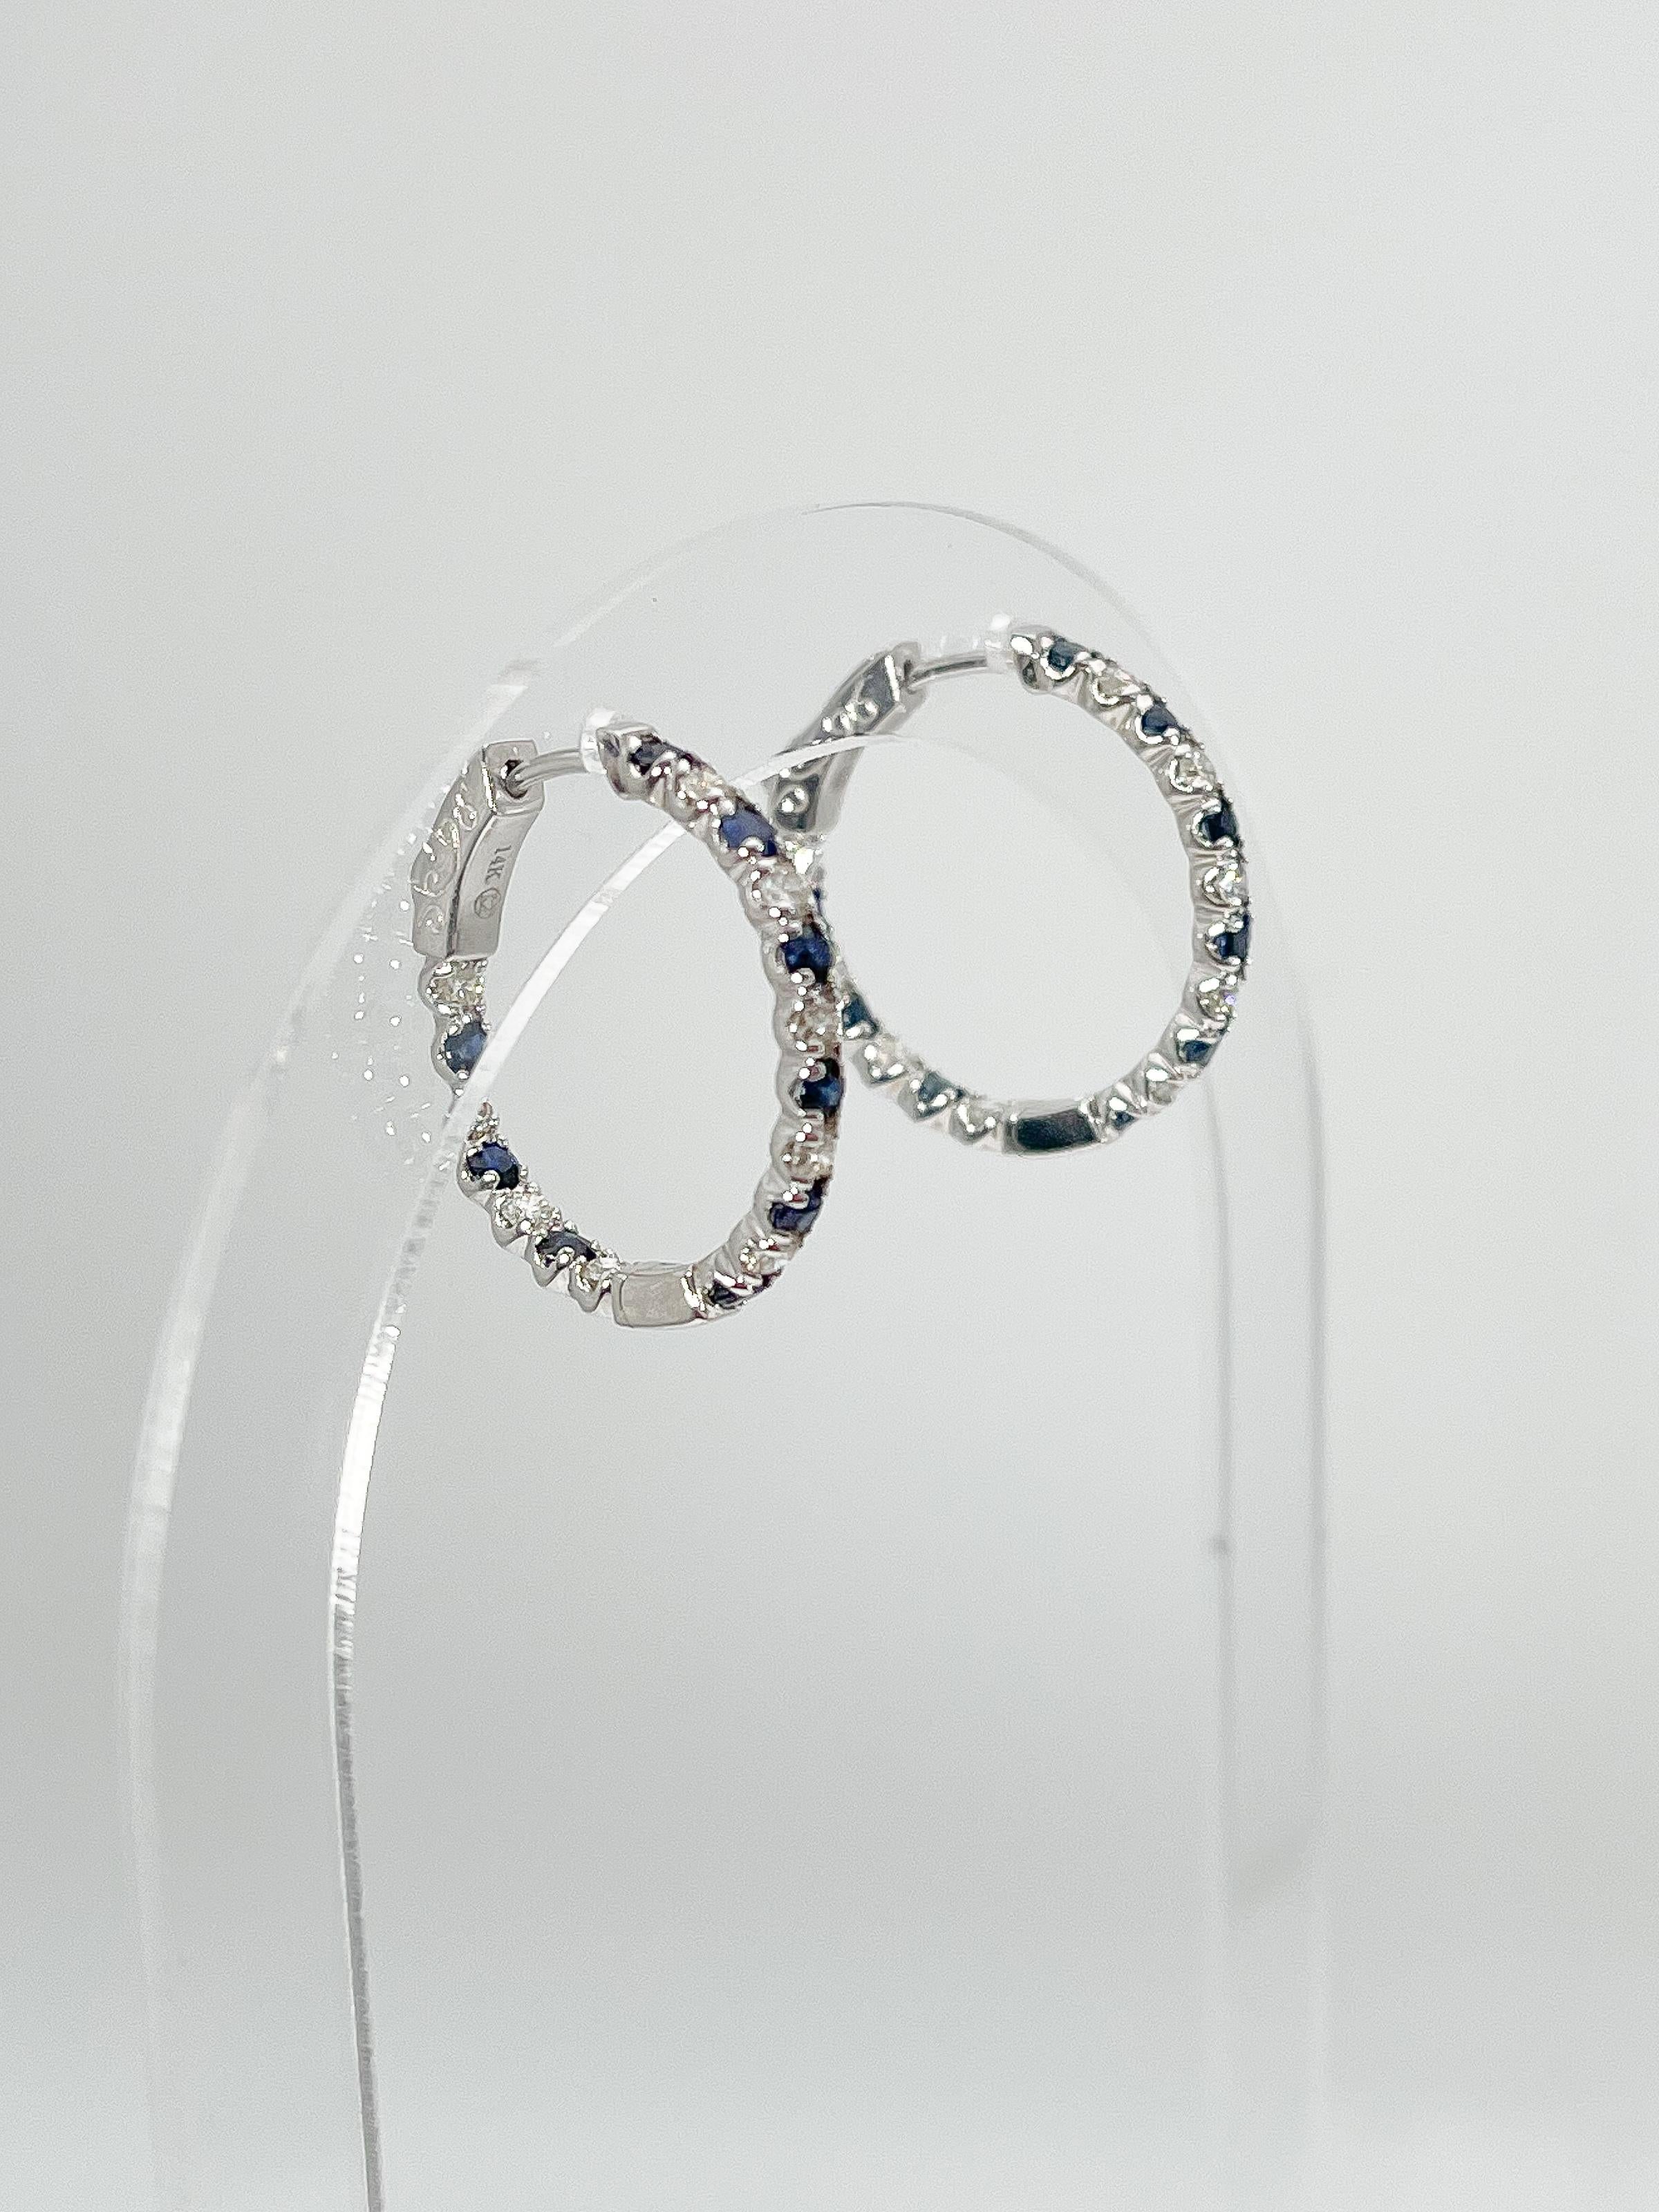 14K White Gold .79 CTW Diamond and 1.15 CTW Sapphire Hoop Earrings In New Condition For Sale In Stuart, FL